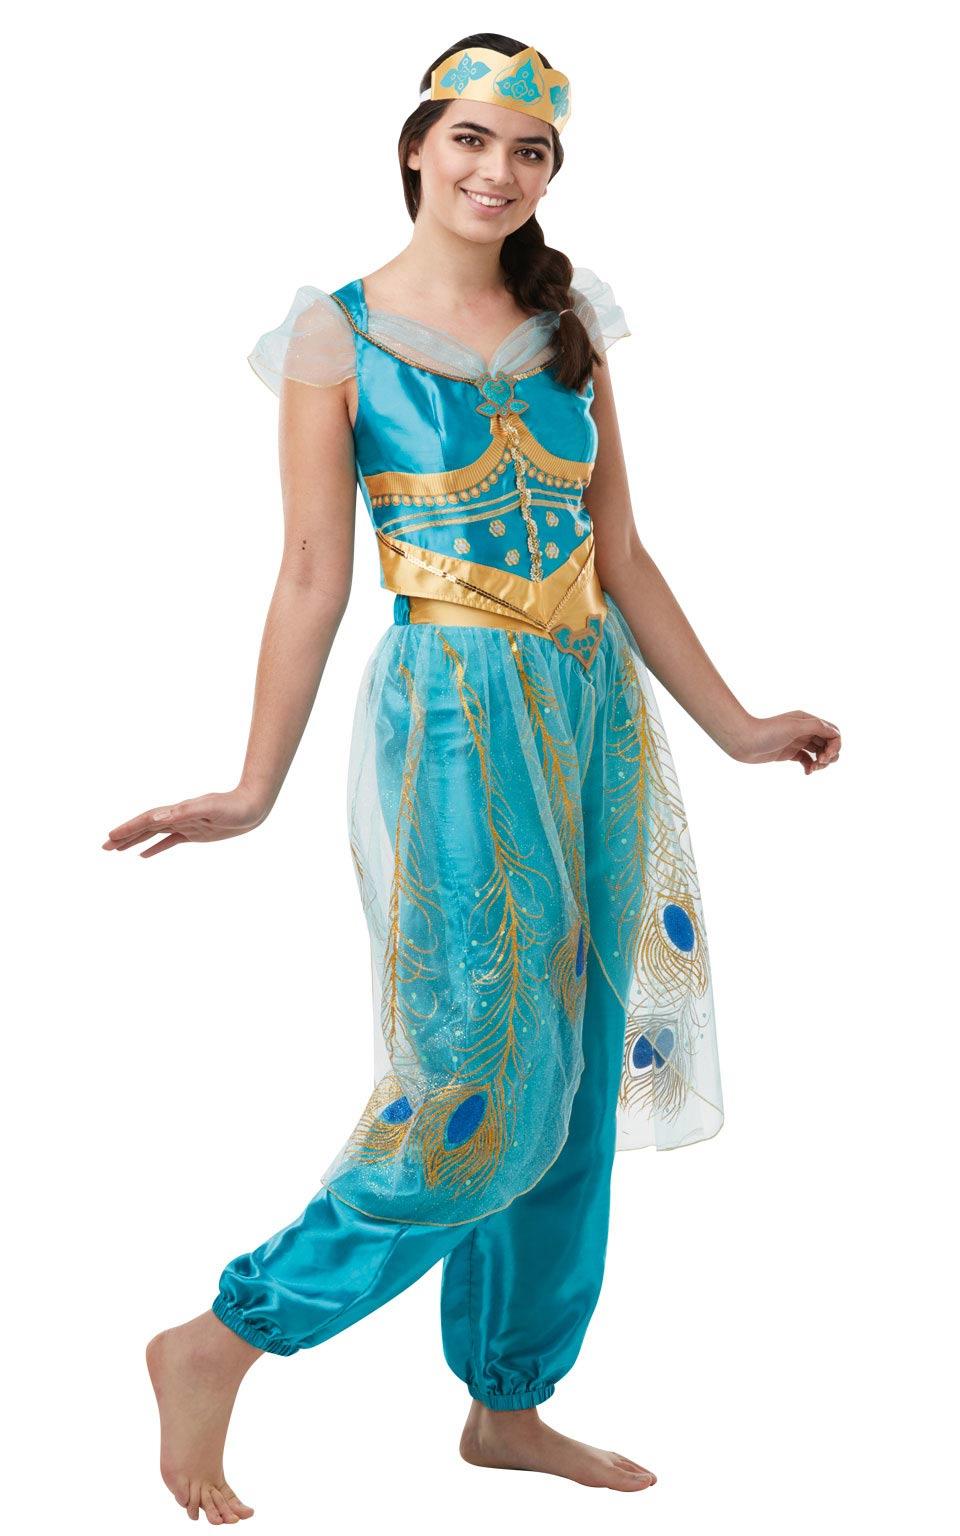 Disney's Jasmine Costume from Aladdin for Adults by Rubies 300303 available here at Karnival Costumes online party shop